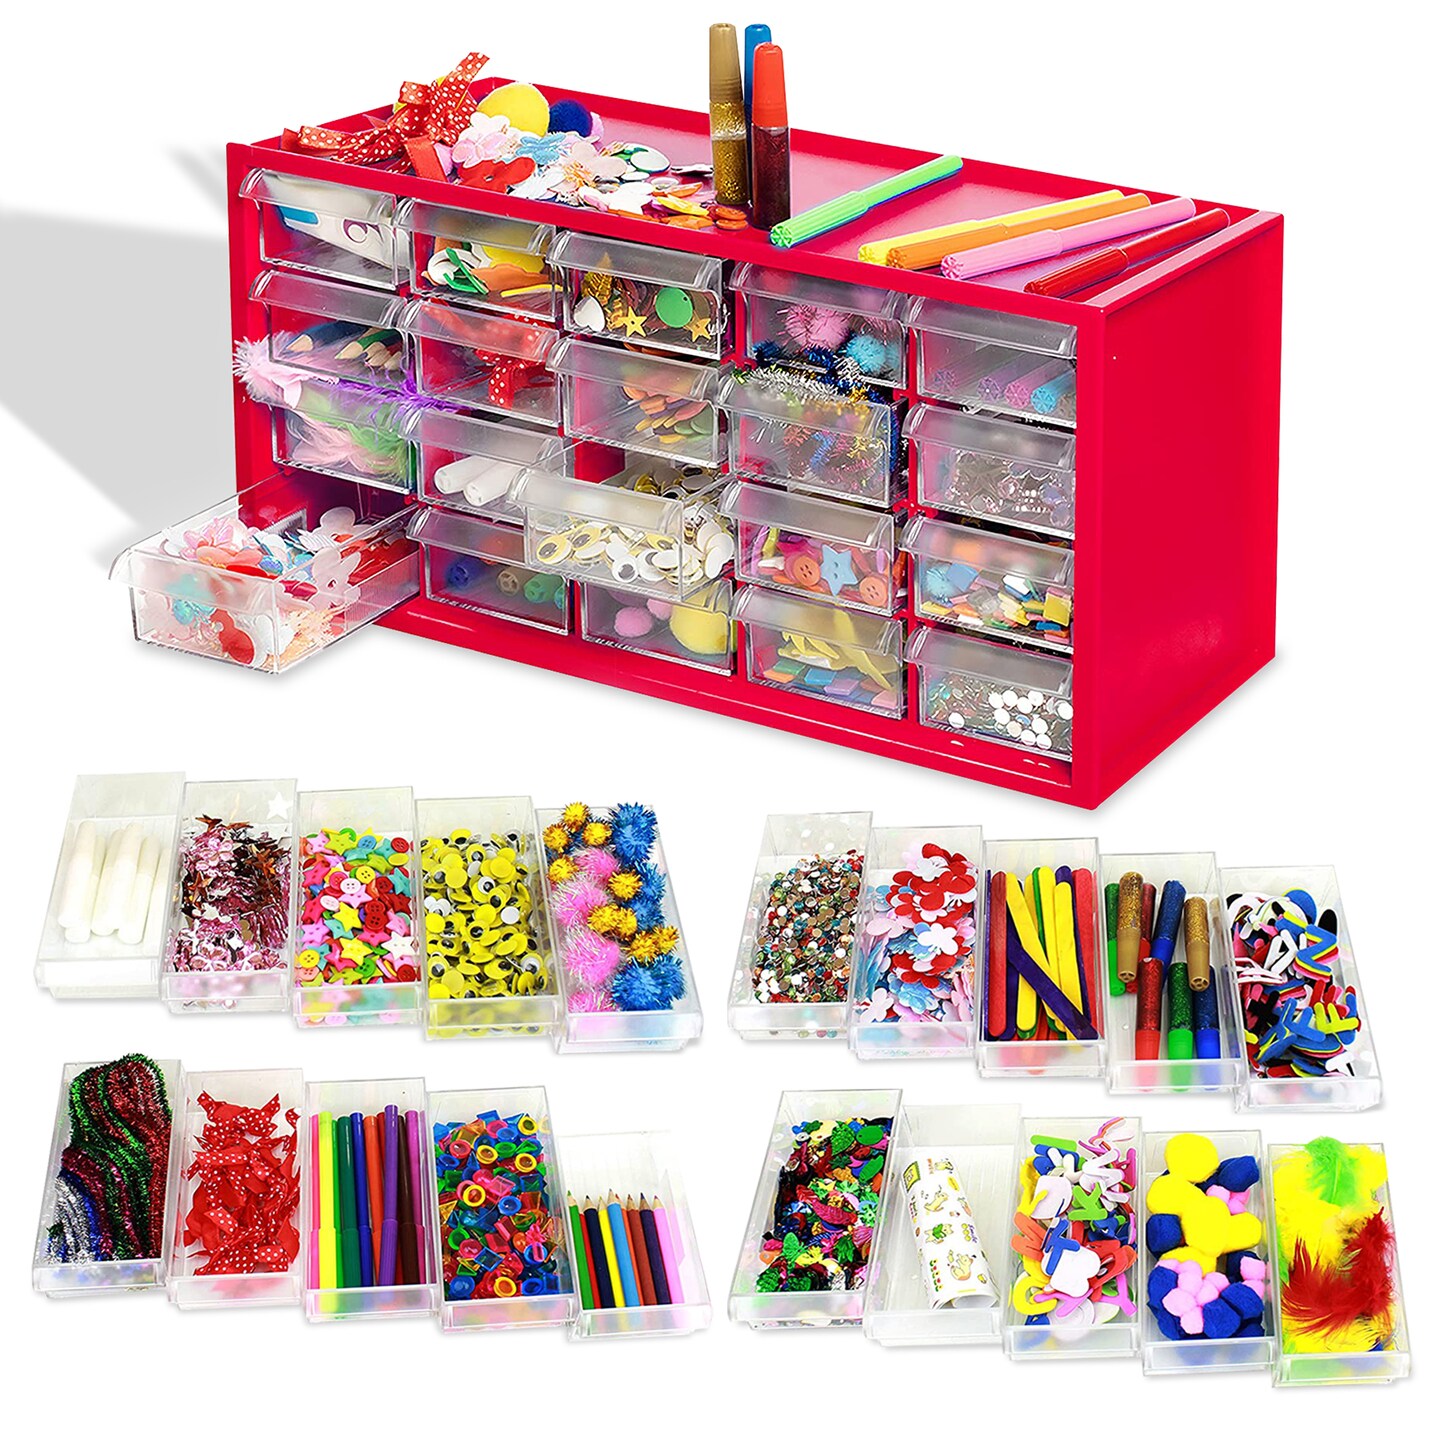 Kraftic Arts &#x26; Crafts Supplies Center for Kids Craft Supplies Kit Complete with 20 Filled Drawers of Craft Materials for Toddlers